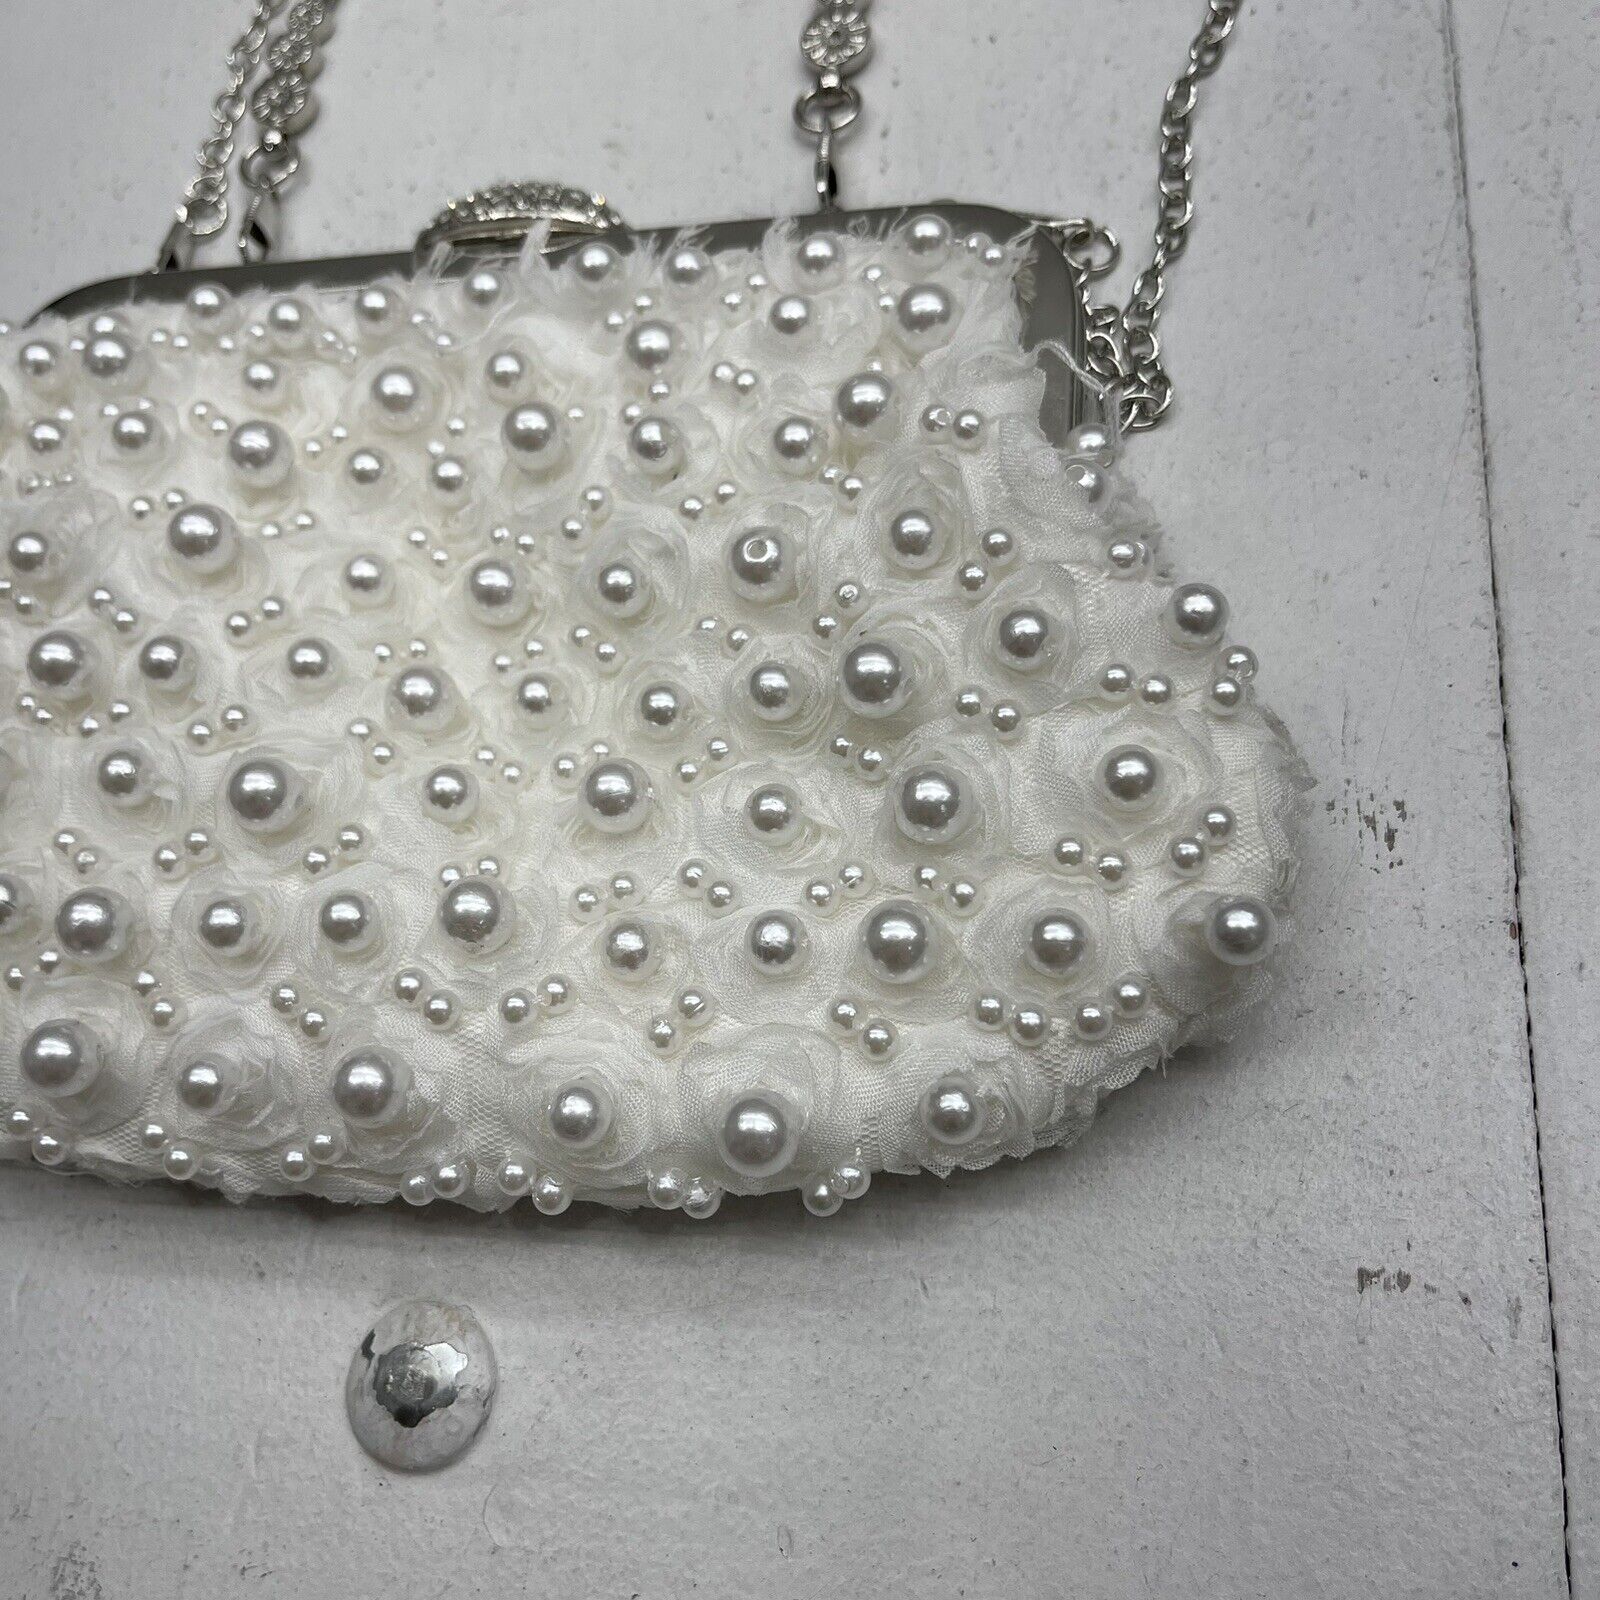 Shimmer Rhinestone Clutch in Silver - Best of Everything | Online Shopping